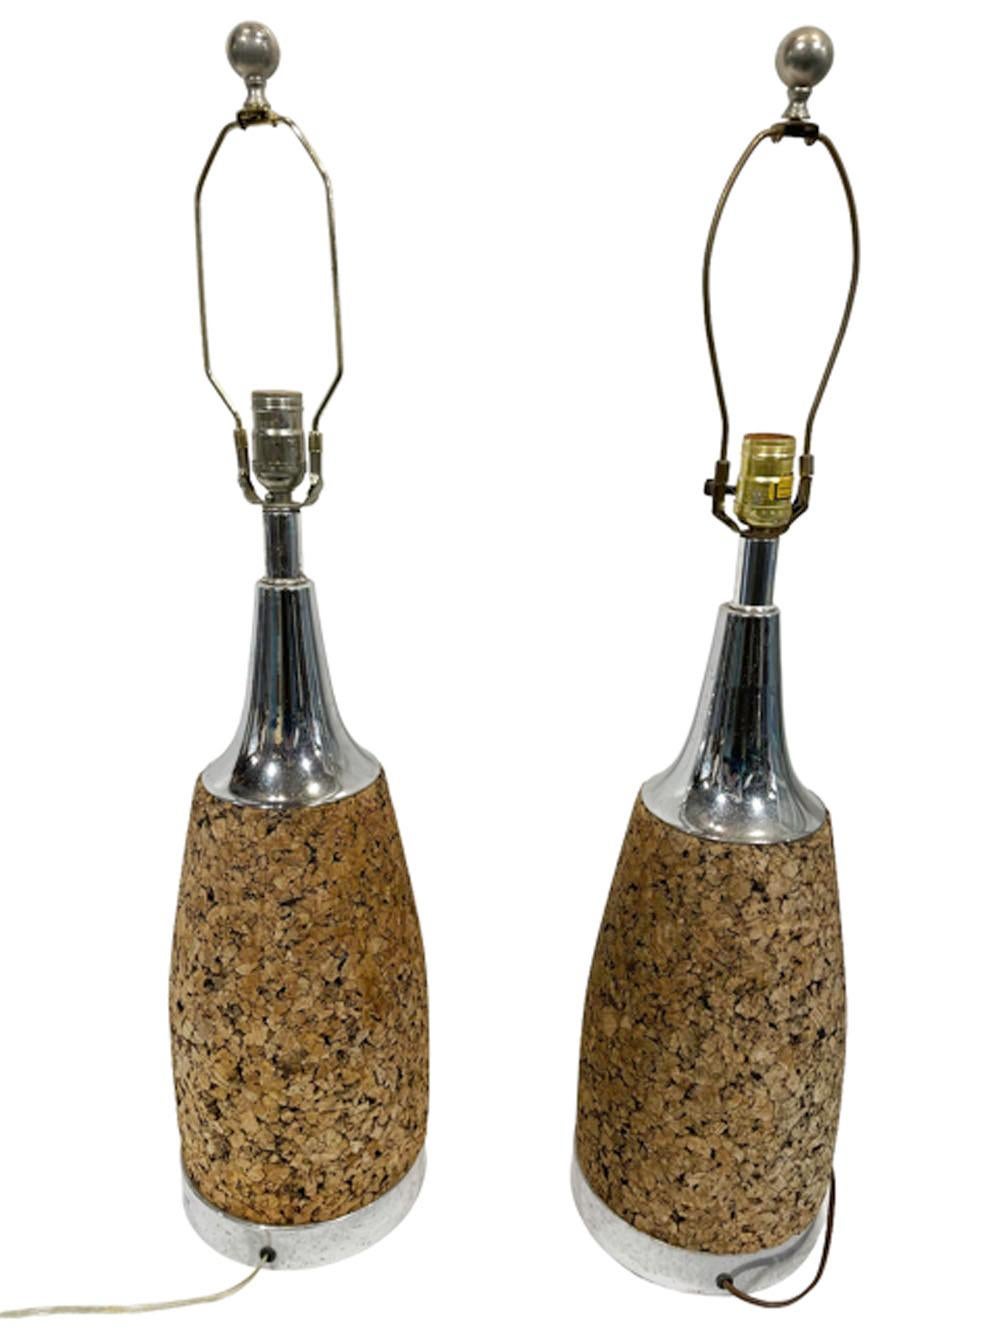 Pair of Mid-Century Modern Cork and Chrome Table Lamps of Bottle Form In Good Condition For Sale In Nantucket, MA